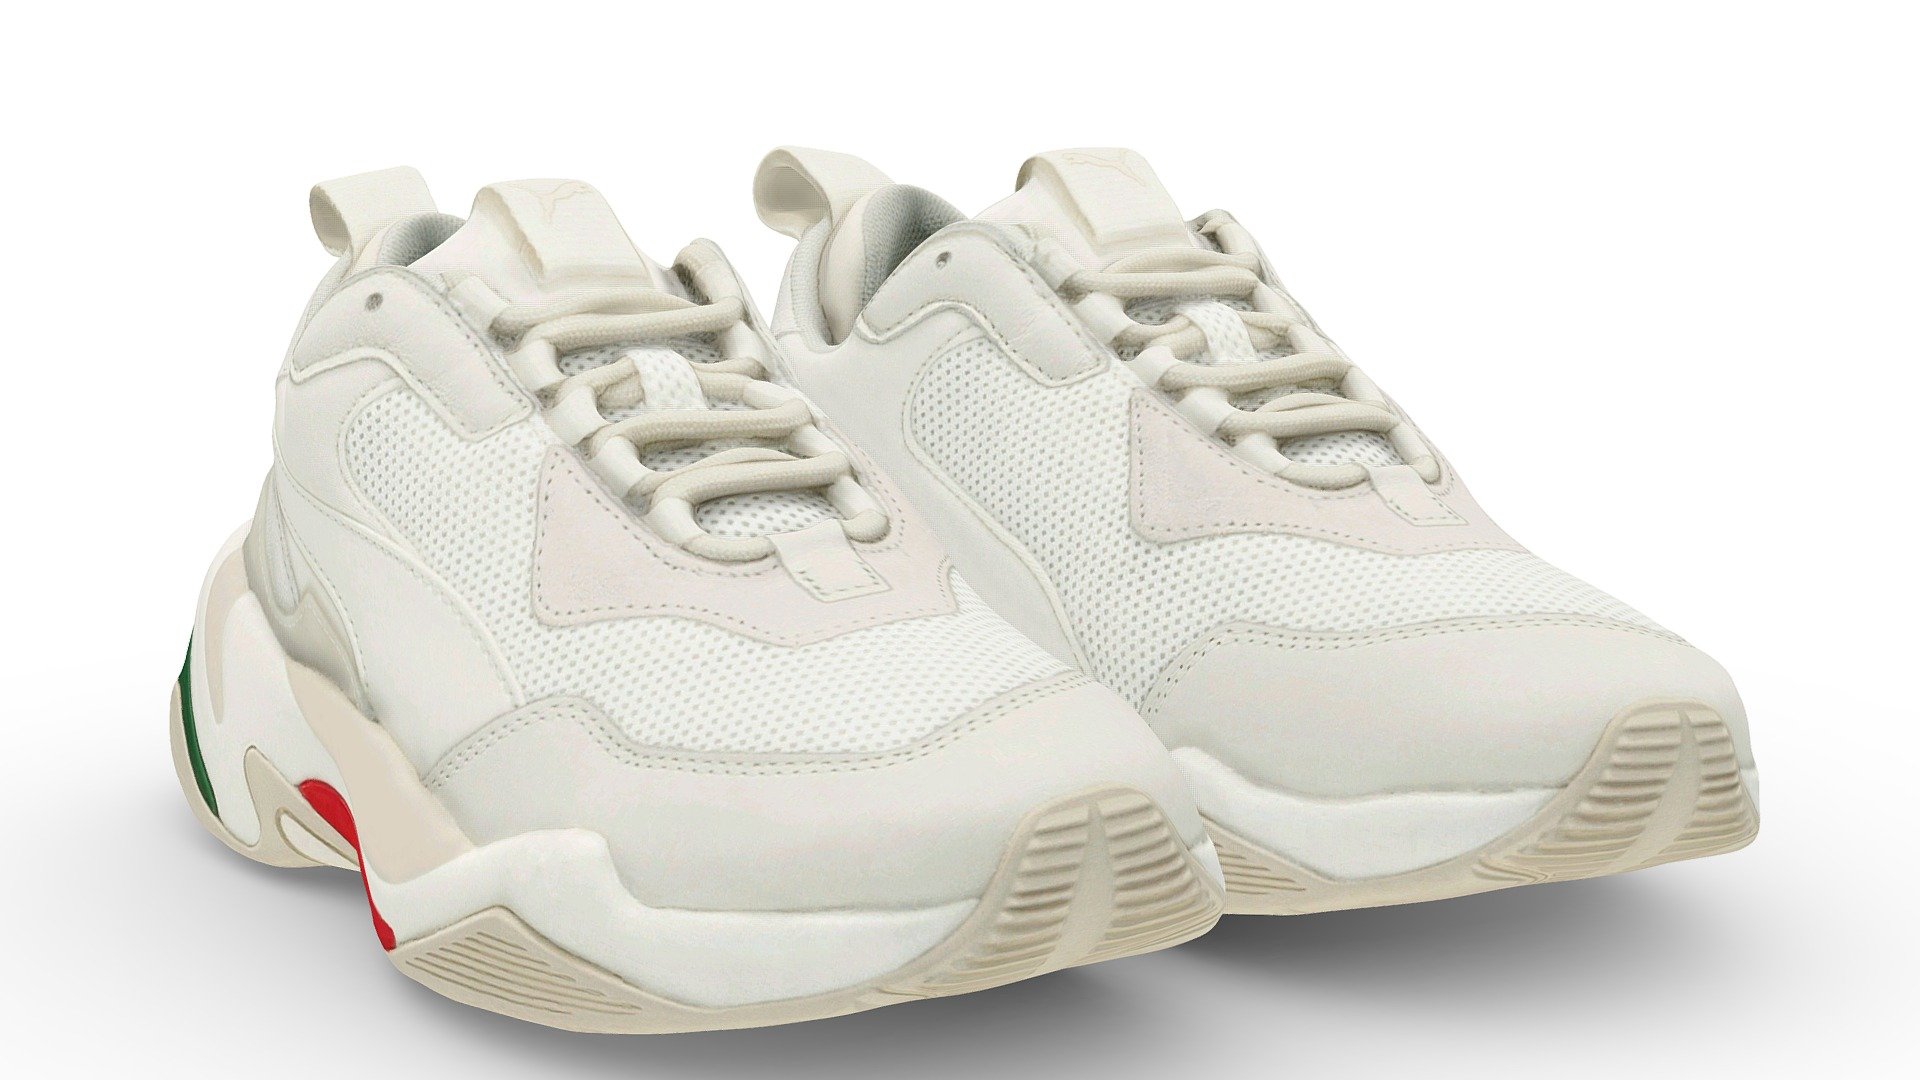 A Very Detailed shoes with High-Quality .

The Mesh is UV unwrapped.

4096x4096 Texture Maps jpg，in the compressed file rar.

The textures is lighting baked,the texture is uploaded to preview images.

File Formats :

FBX .OBJ .stl.collada(dae).Maya2019,Texture(jpg format).

If you want to modify the color of the shoes, it is easy to do with photopshop. The screenshot shows how to do it.

This is a professional scanning agency, if there are any shoes that are not included, please let me know.My E-mail:951723610@qq.com,It will helps a lot.By the way,we are available for custom shoes scan.

Don't forget to check my other sneakers,Have a nice day：） - Puma Thunder Spectra White - Buy Royalty Free 3D model by Vincent Page (@vincentpage) 3d model